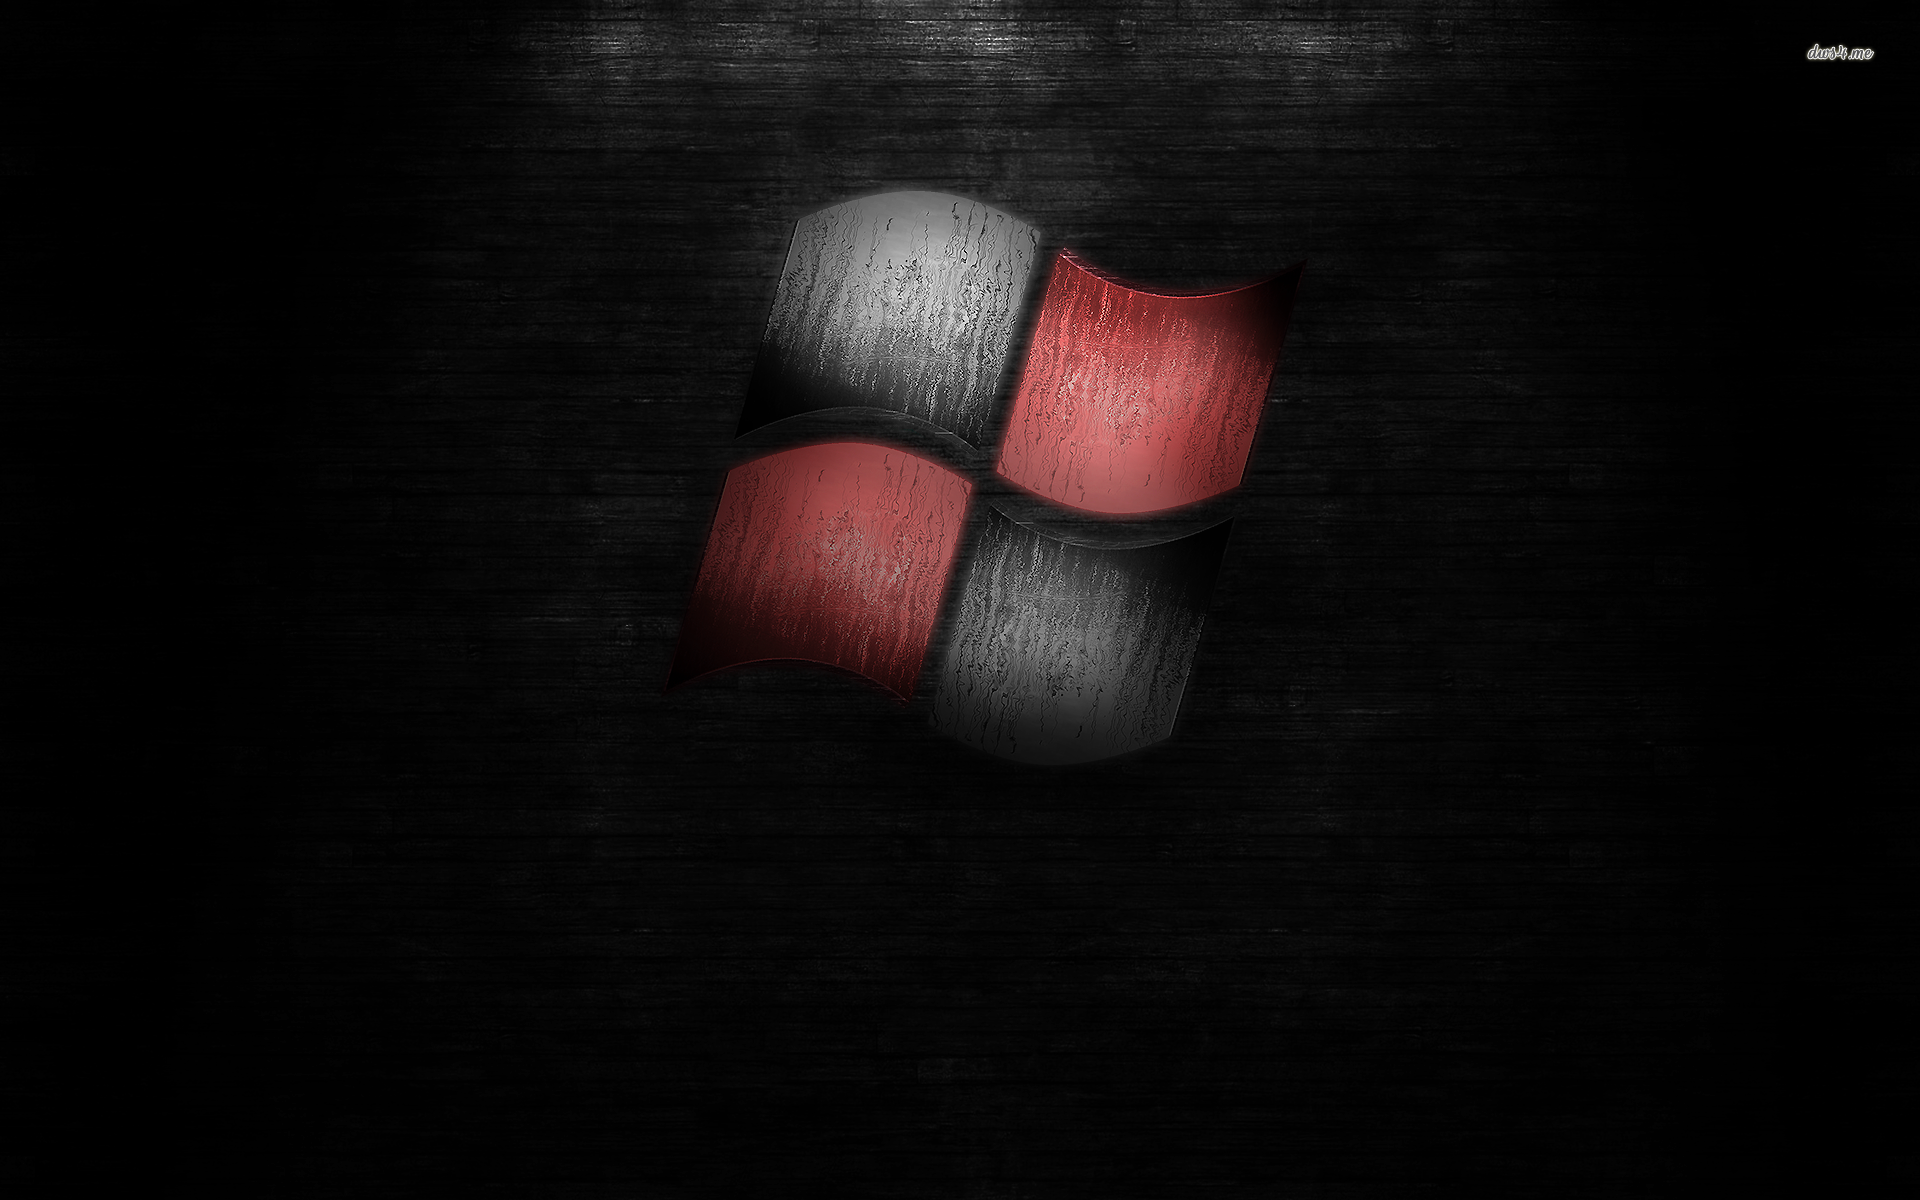 Free download Black and red Windows logo wallpaper Computer